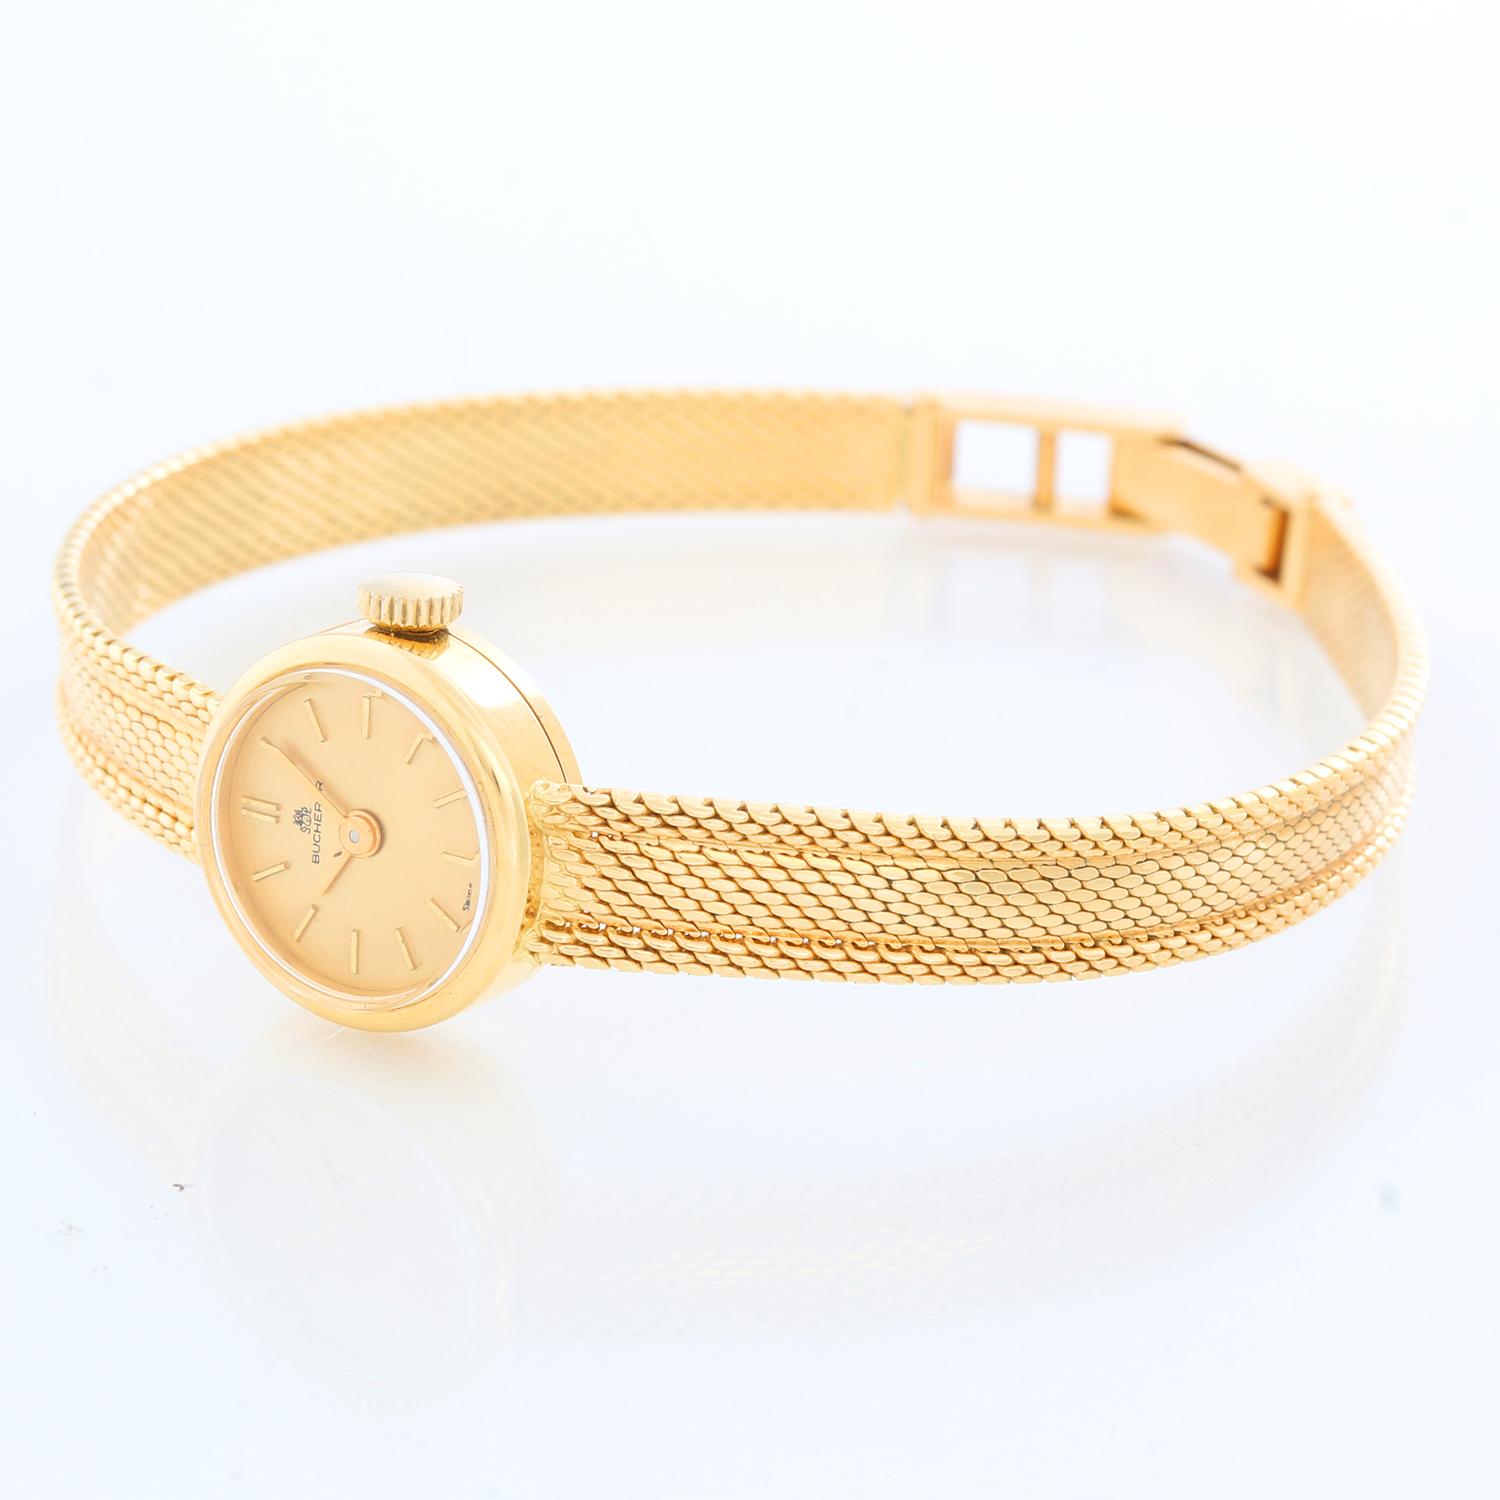 Bucherer 18K Yellow Ladies Gold Watch - Manual. 18k Yellow Gold ( 15 mm ). Champagne dial with stick hour markers. Mesh 18K yellow gold bracelet. Will fit up to a 6.25 inch wrist. Pre-owned with Bucherer box. 